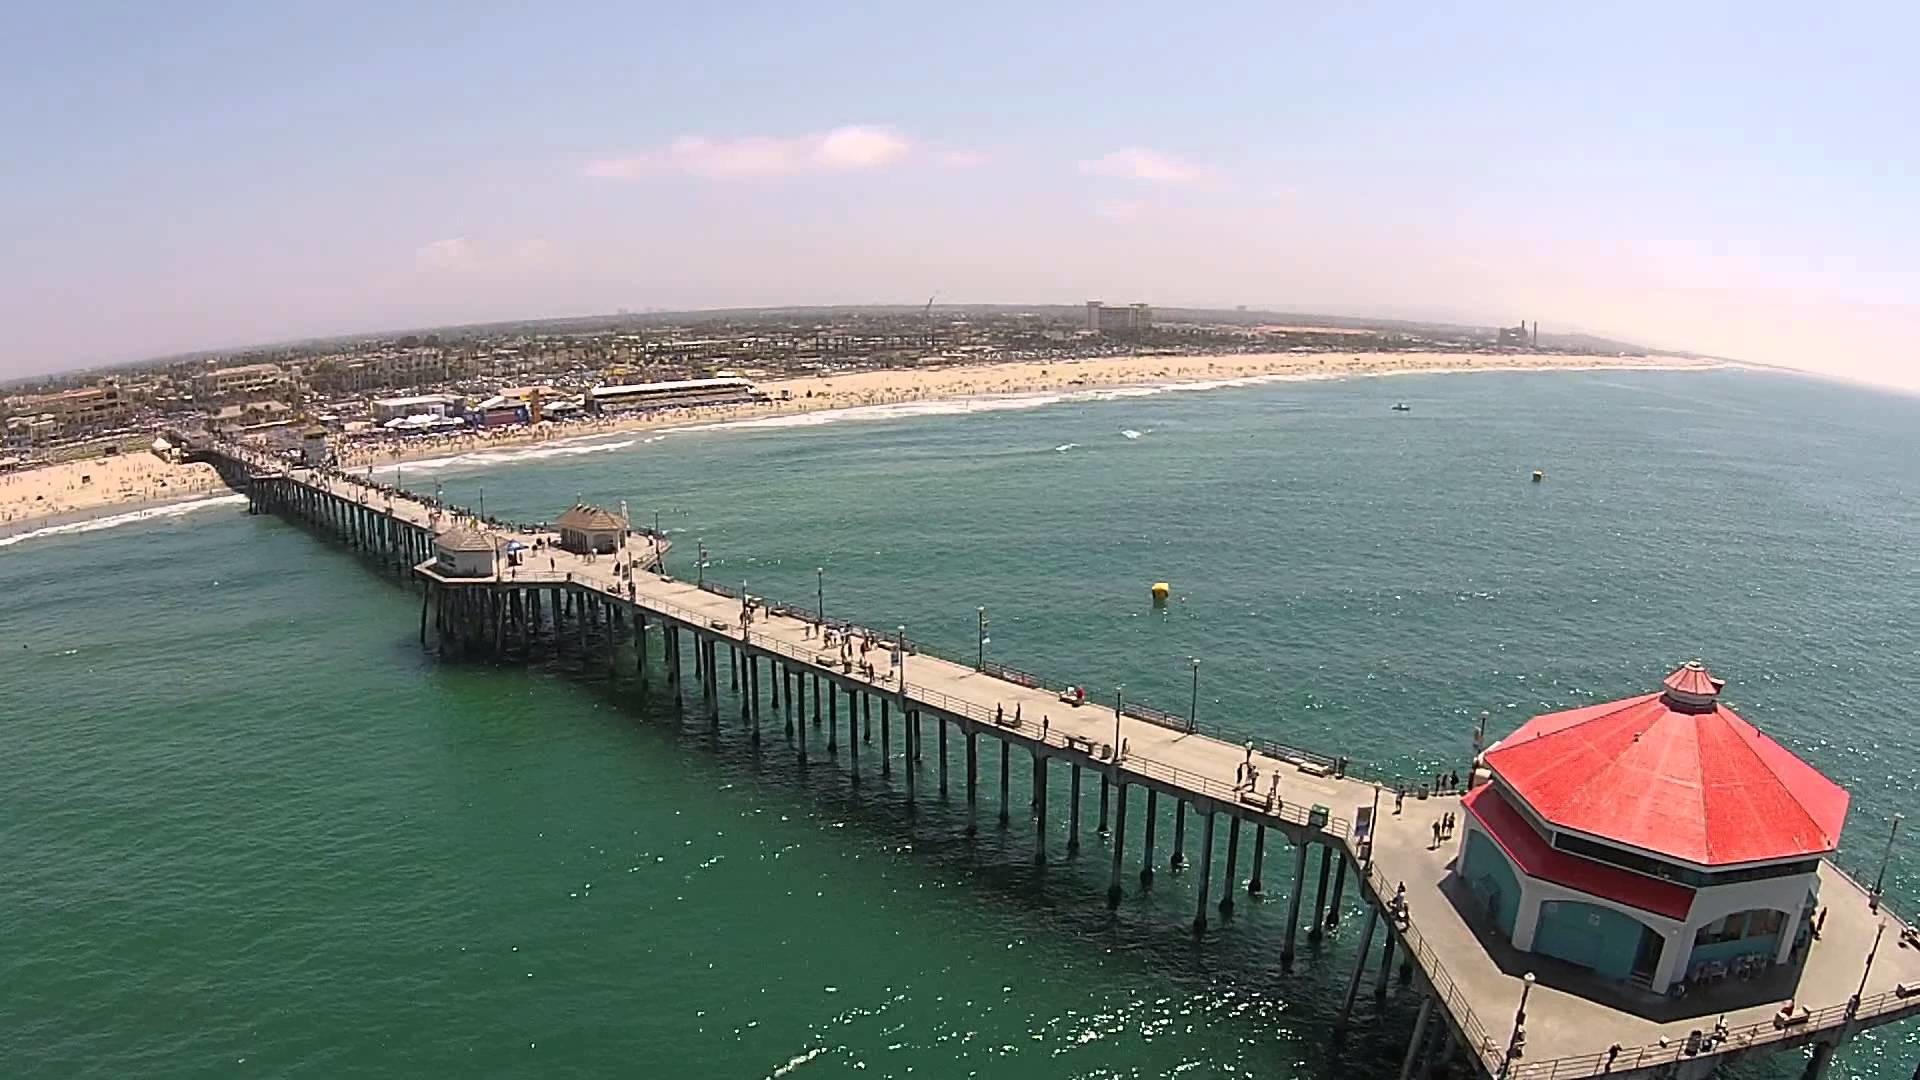 1920x1080 Drone Aerial View of Huntington Beach Pier - US Open Surfing - Phantom 2  Vision+ (Plus) Quadcopter - YouTube